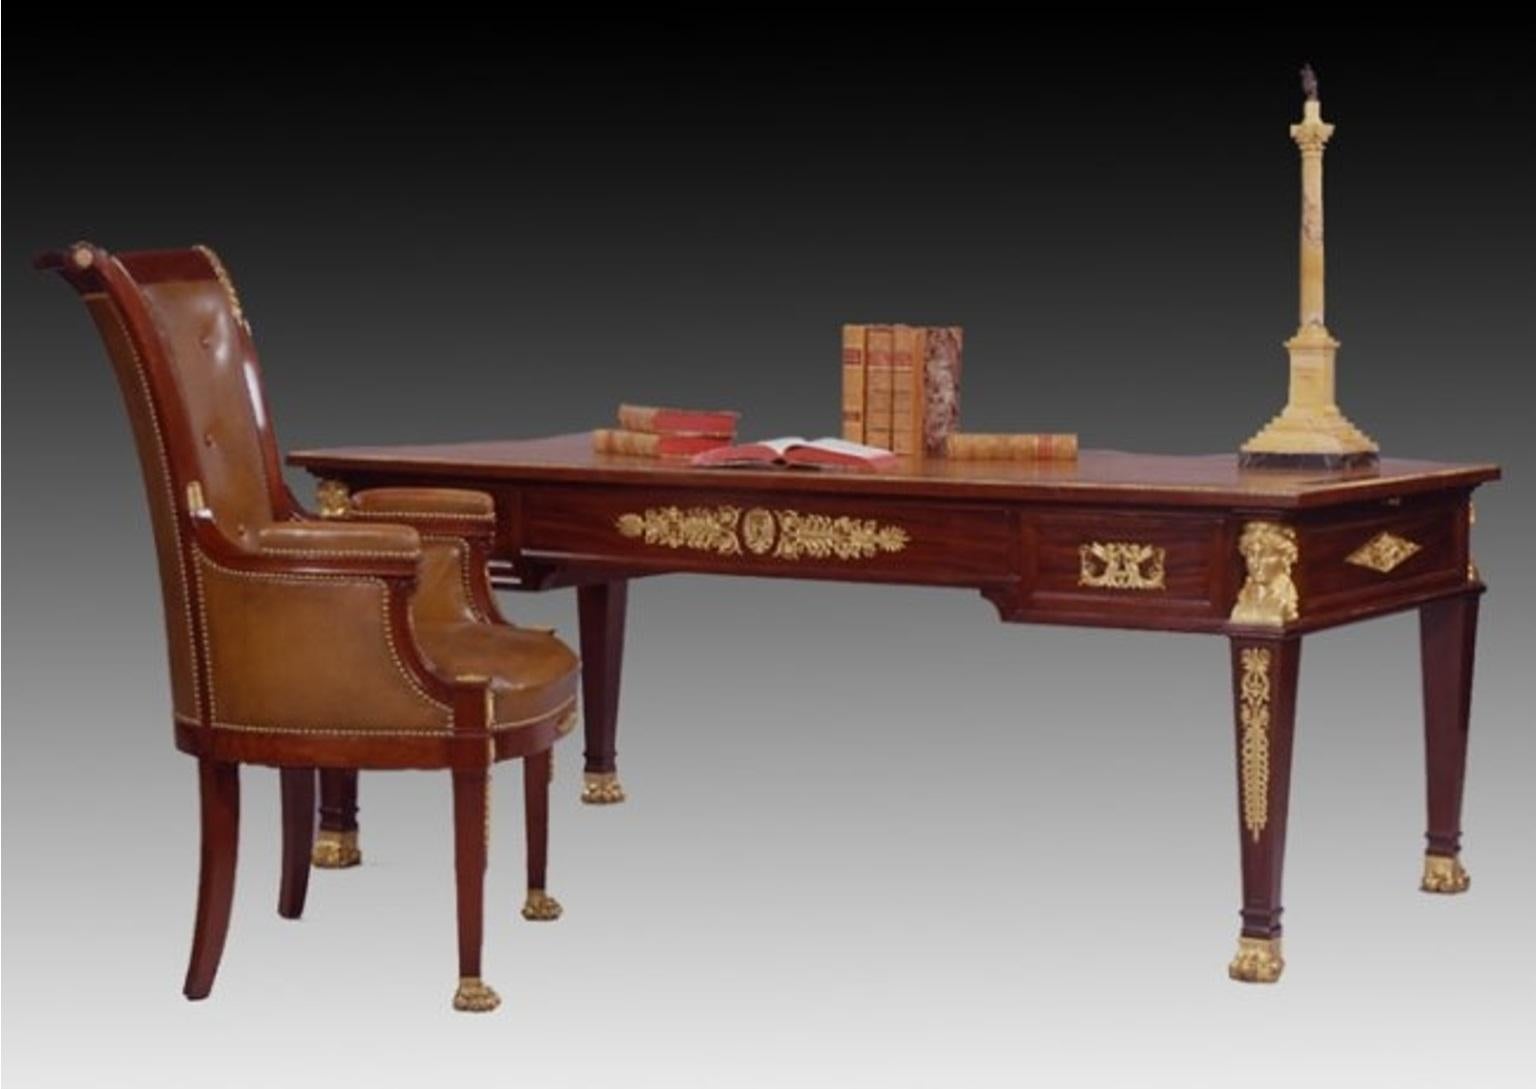 Fine suite of Empire style ormolu-mounted mahogany library furniture,
Maison Lalande, Paris, 1890-1900, 
comprising: a bureau plat, a large cartioneire and three tub chairs, each with applied gilt bronze crowned female headed terms, anthemion,